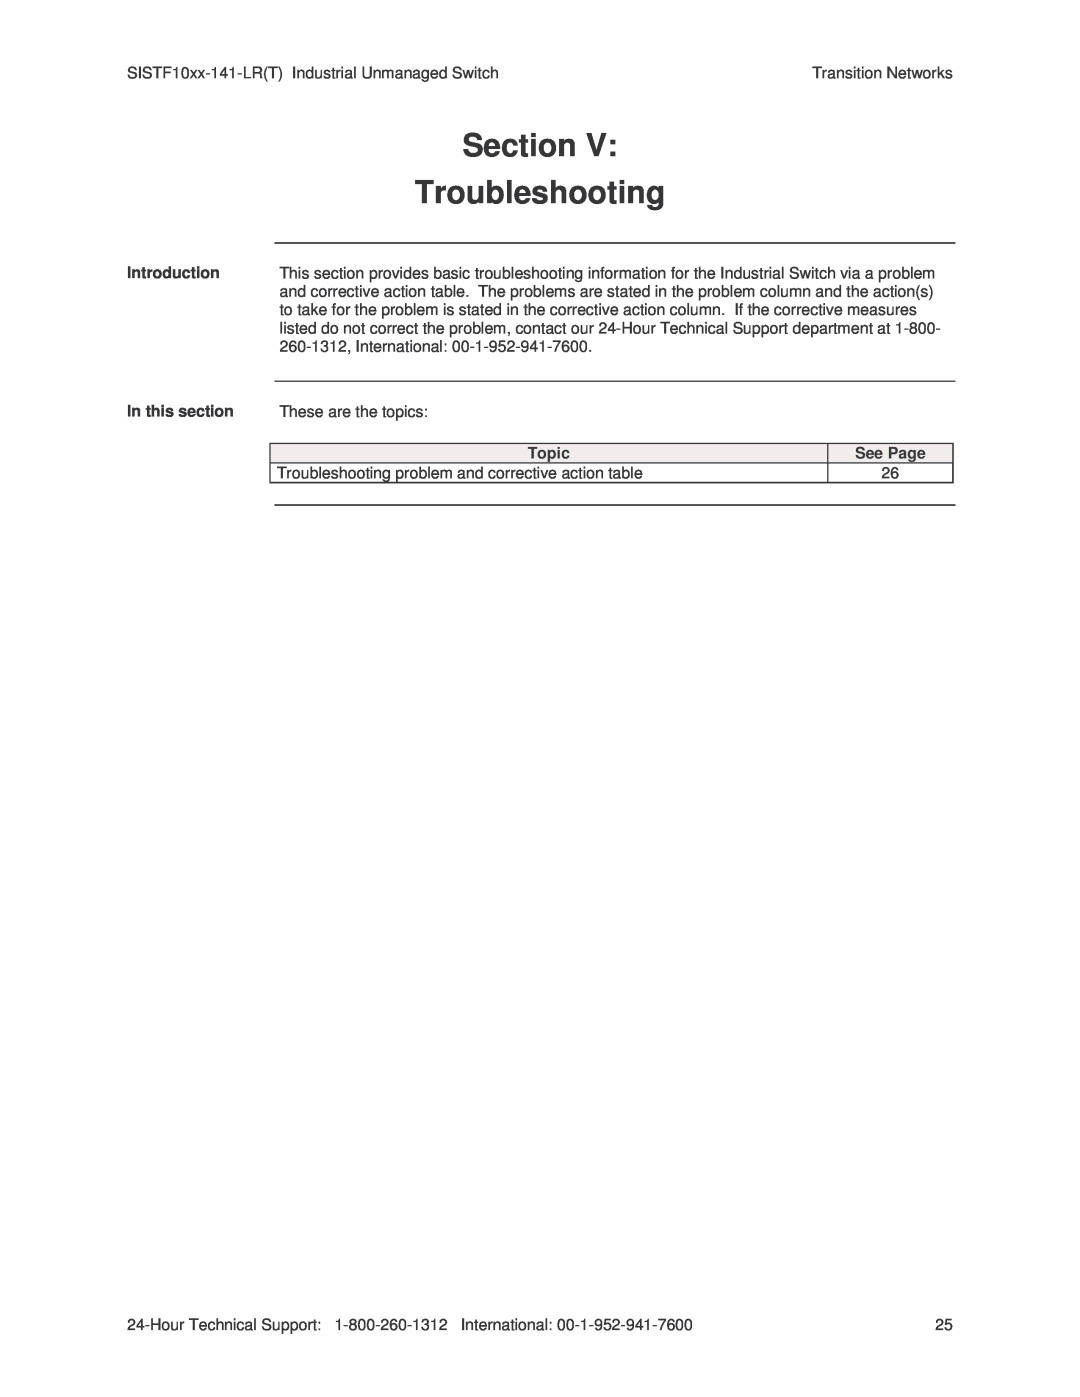 Transition Networks SISTF10xx-141-LR(T) installation manual Section, Troubleshooting 